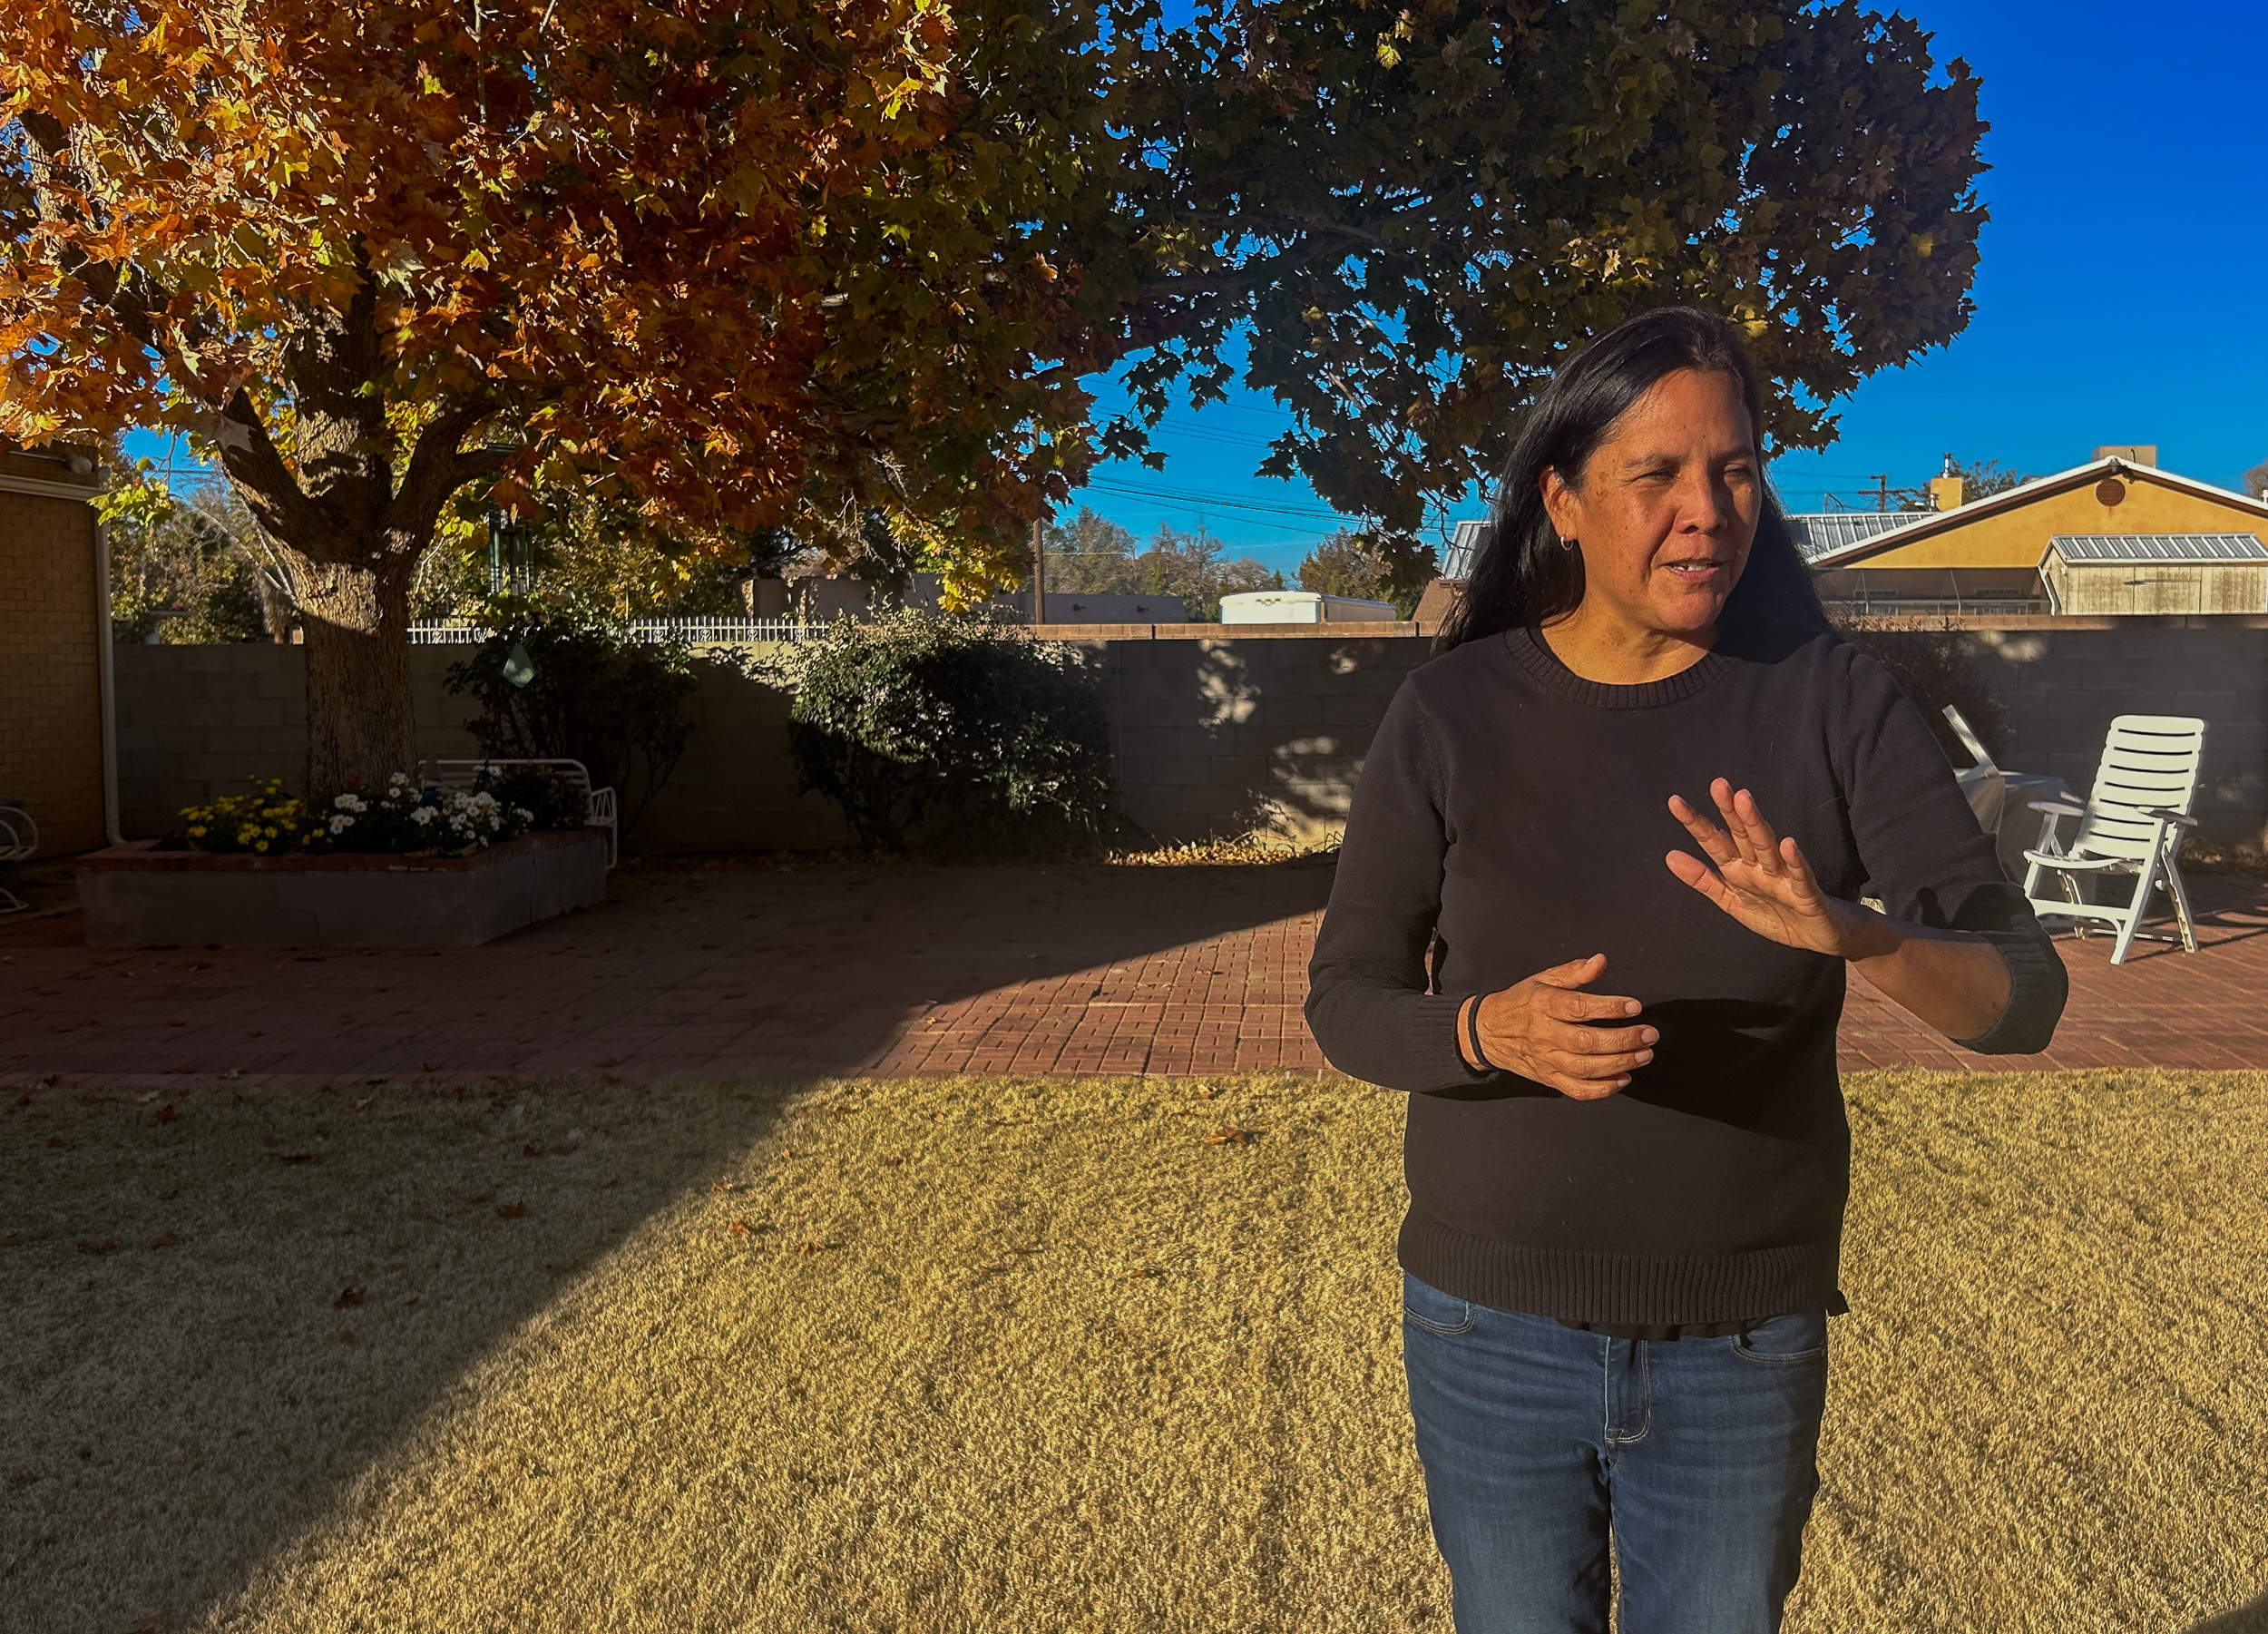 A woman in a sweater and jeans gestures to the space in her grandmother's backyard.